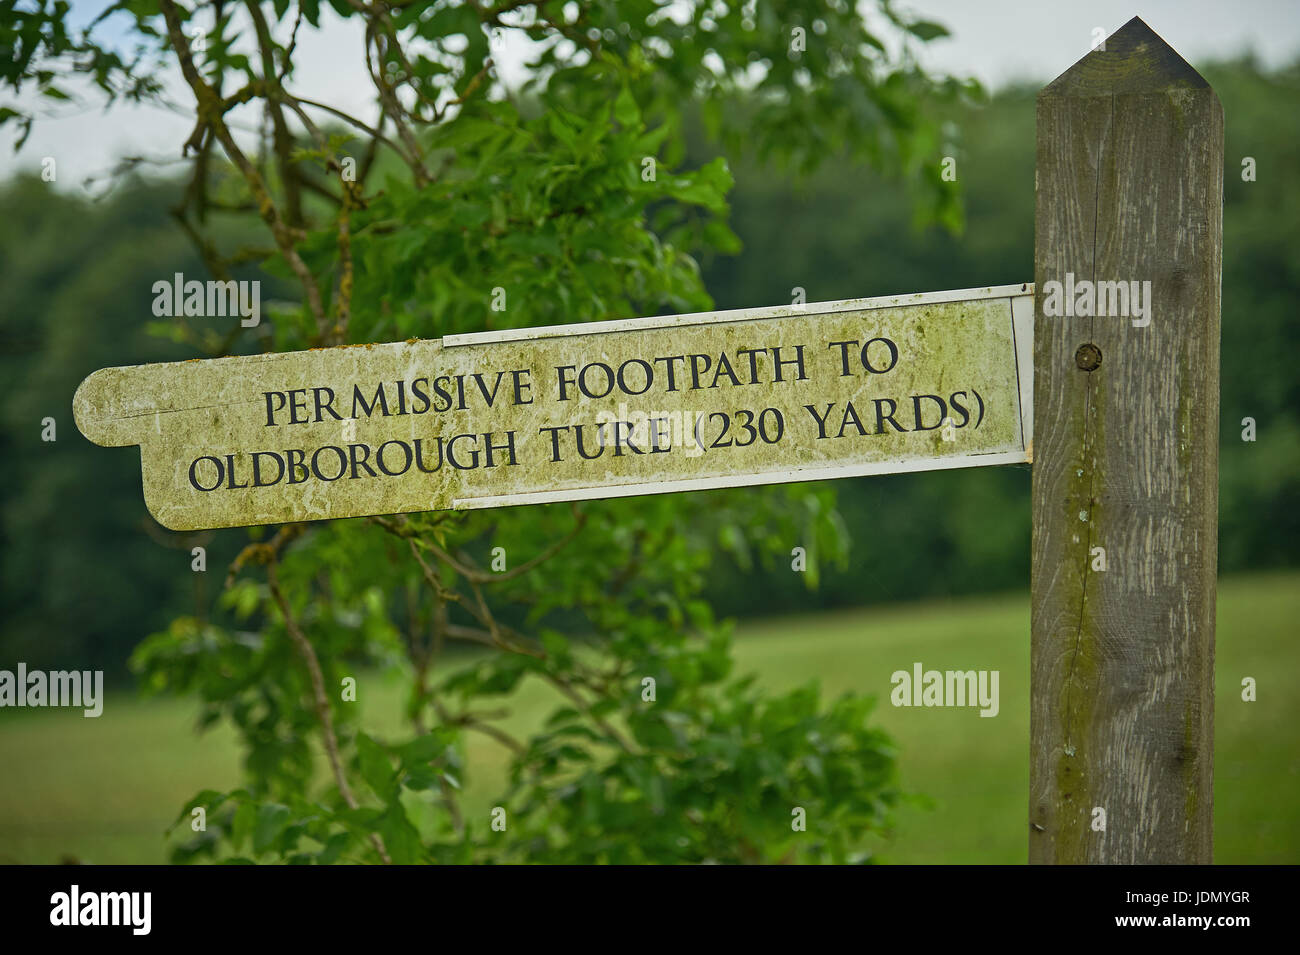 Fingerpost sign highlighting a Permissive Footpath to Oldborough Ture near Cutsdean in the Cotswolds. Stock Photo